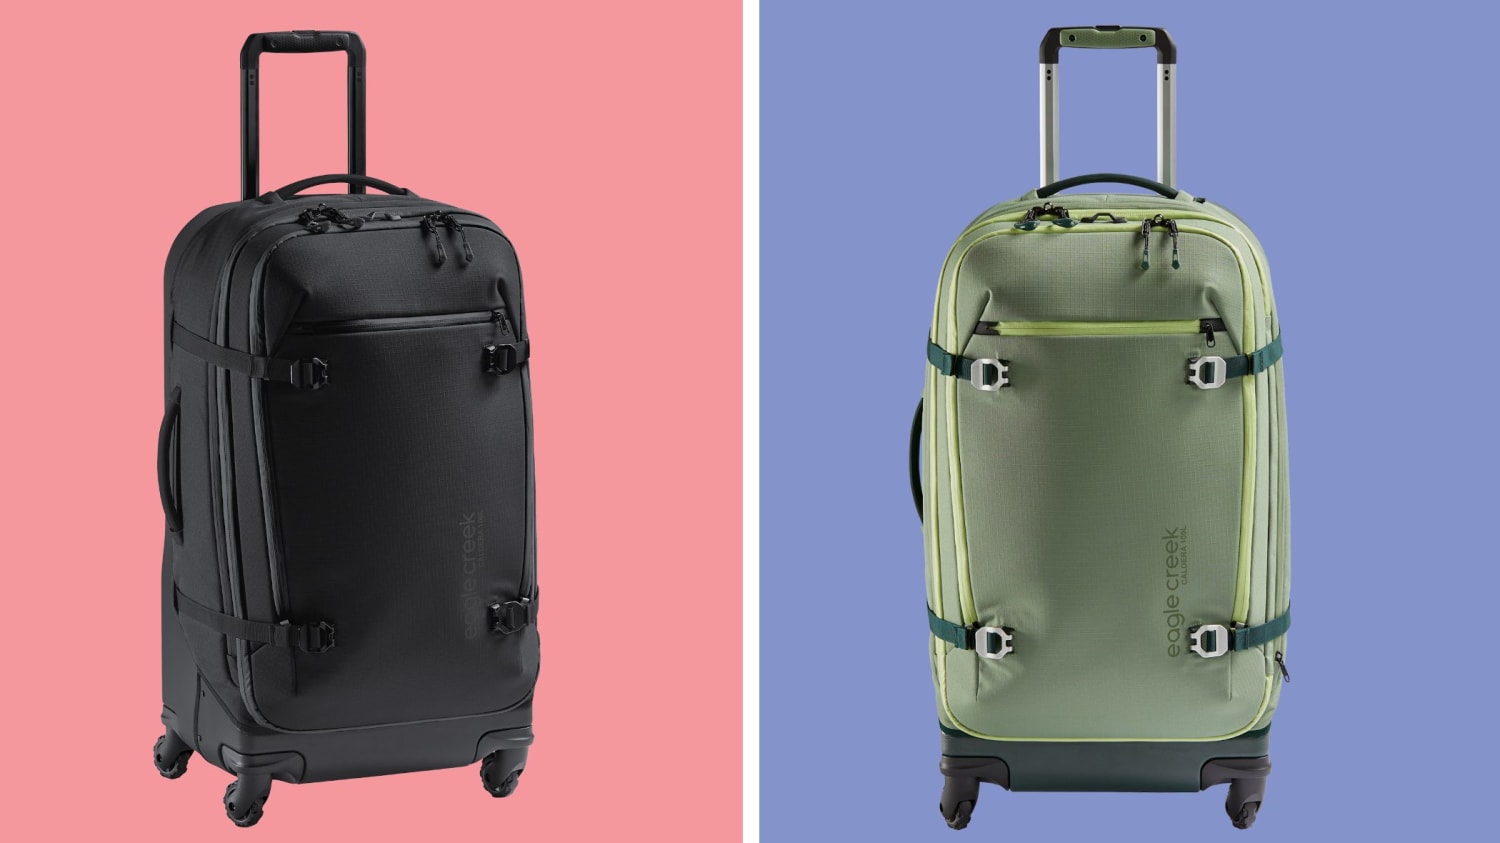 Eagle Creek's Durable Caldera Line of Suitcases Can Digitally Track Your Travels